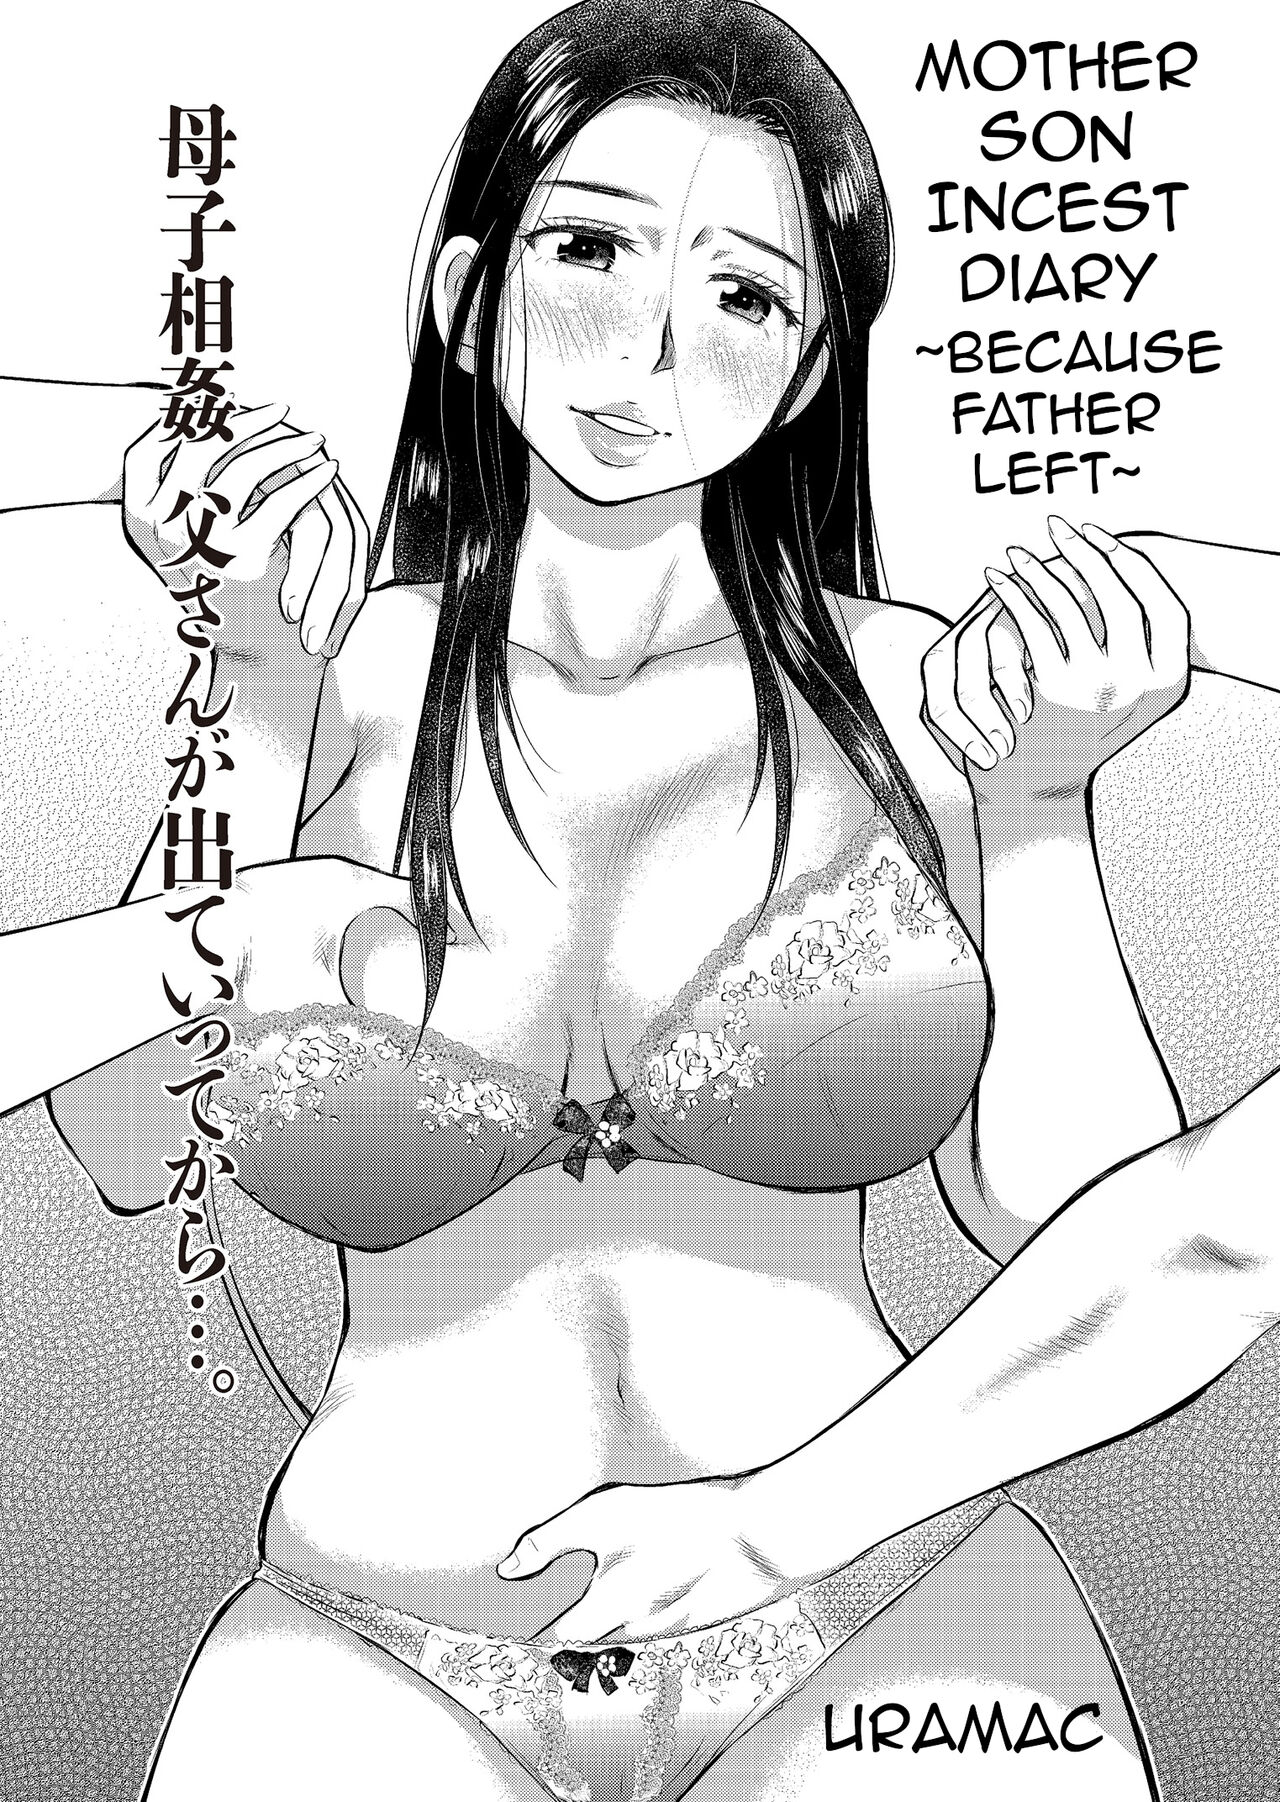 Hentai Manga Comic-Mother Son Incest Diary ~Because Father Left~-Read-1